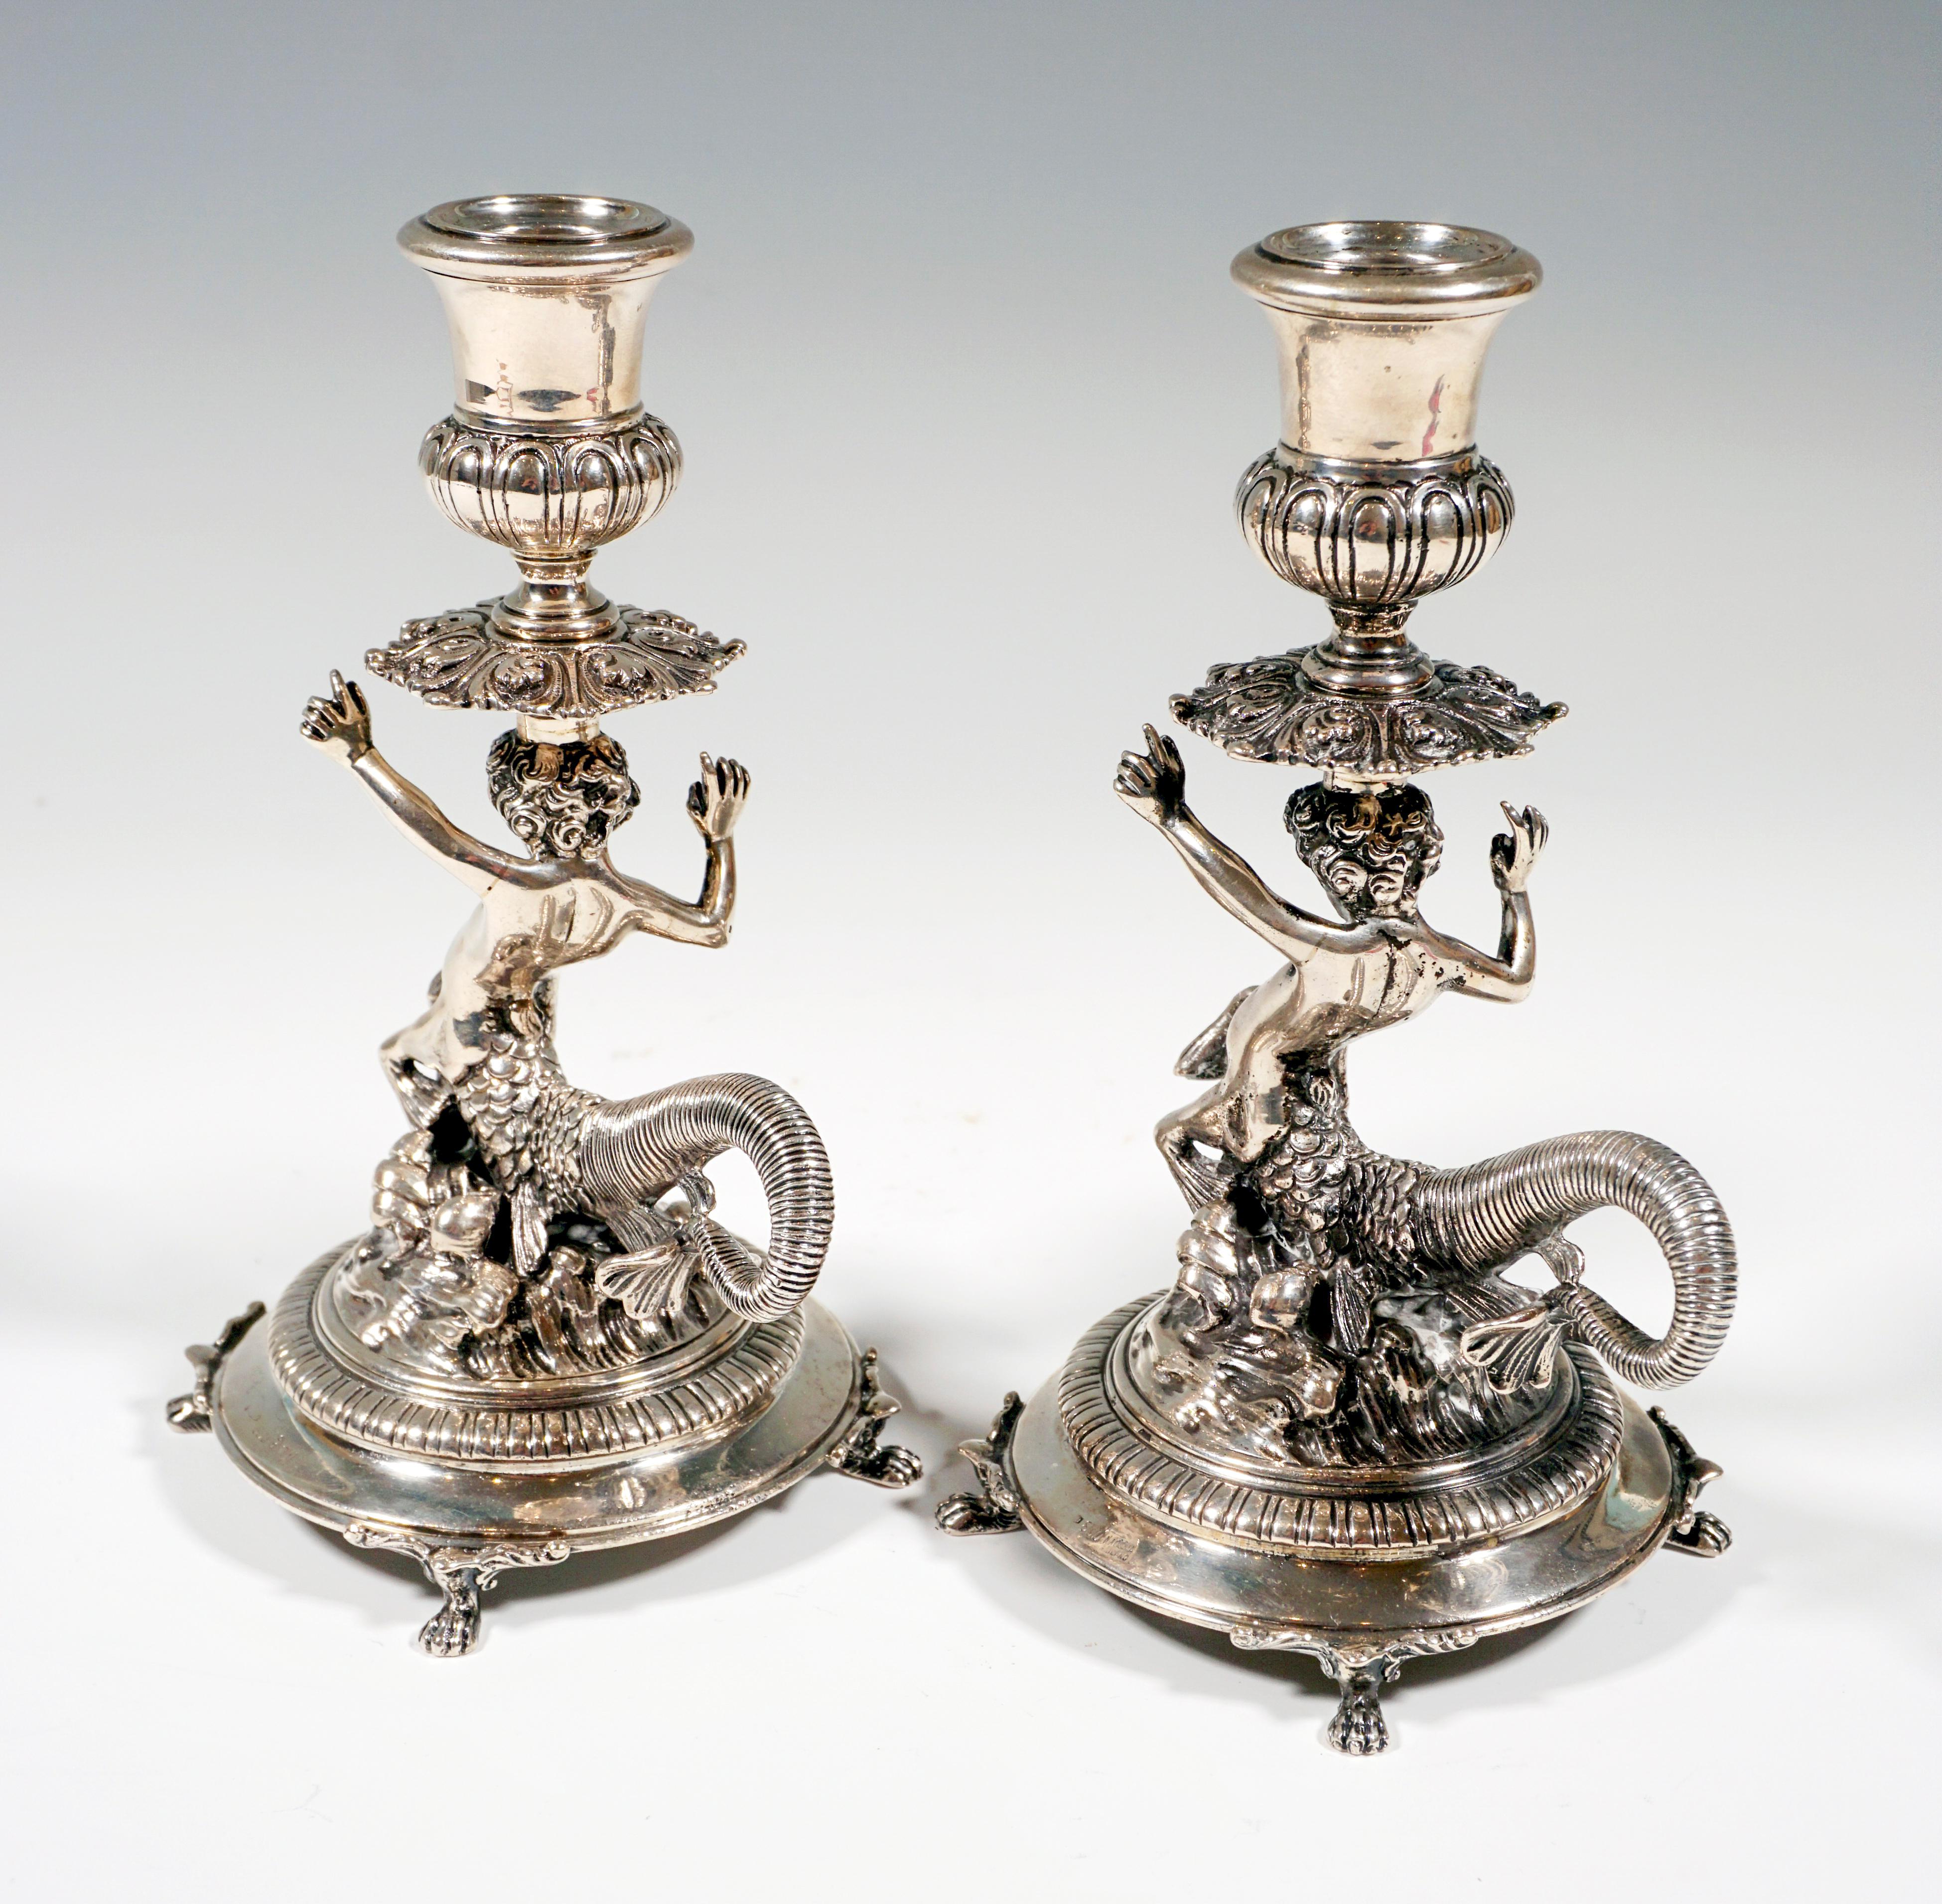 Hand-Crafted Pair of Italian Silver Candle Holders with Cupids as Tritons, Milan, Around 1935